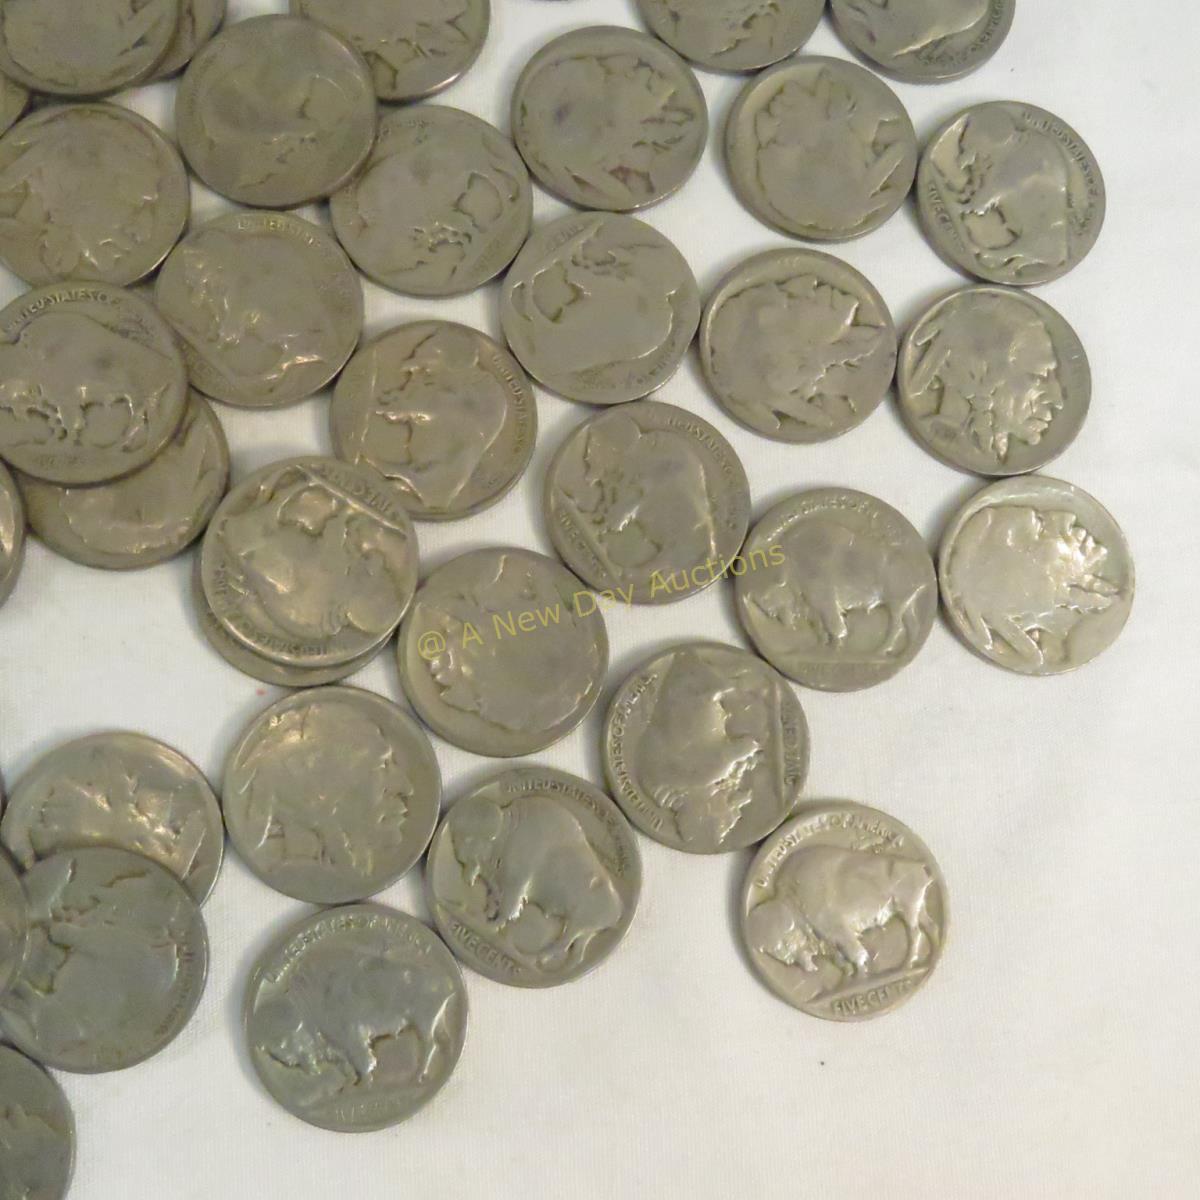 150 + Buffalo Nickels Mostly No Date